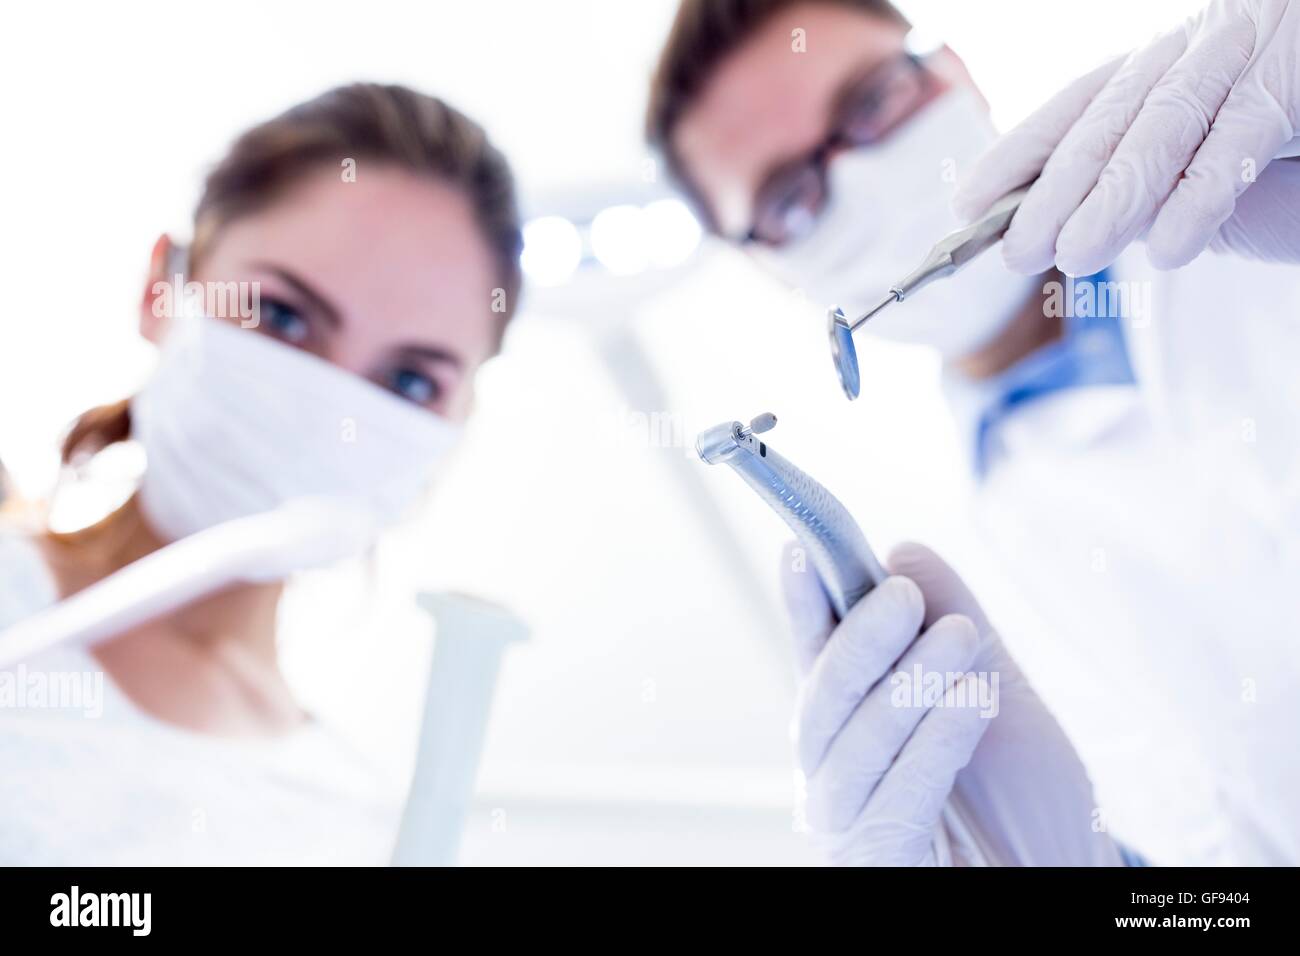 MODEL RELEASED. Dentist and dental assistant conducting dental operation. Stock Photo